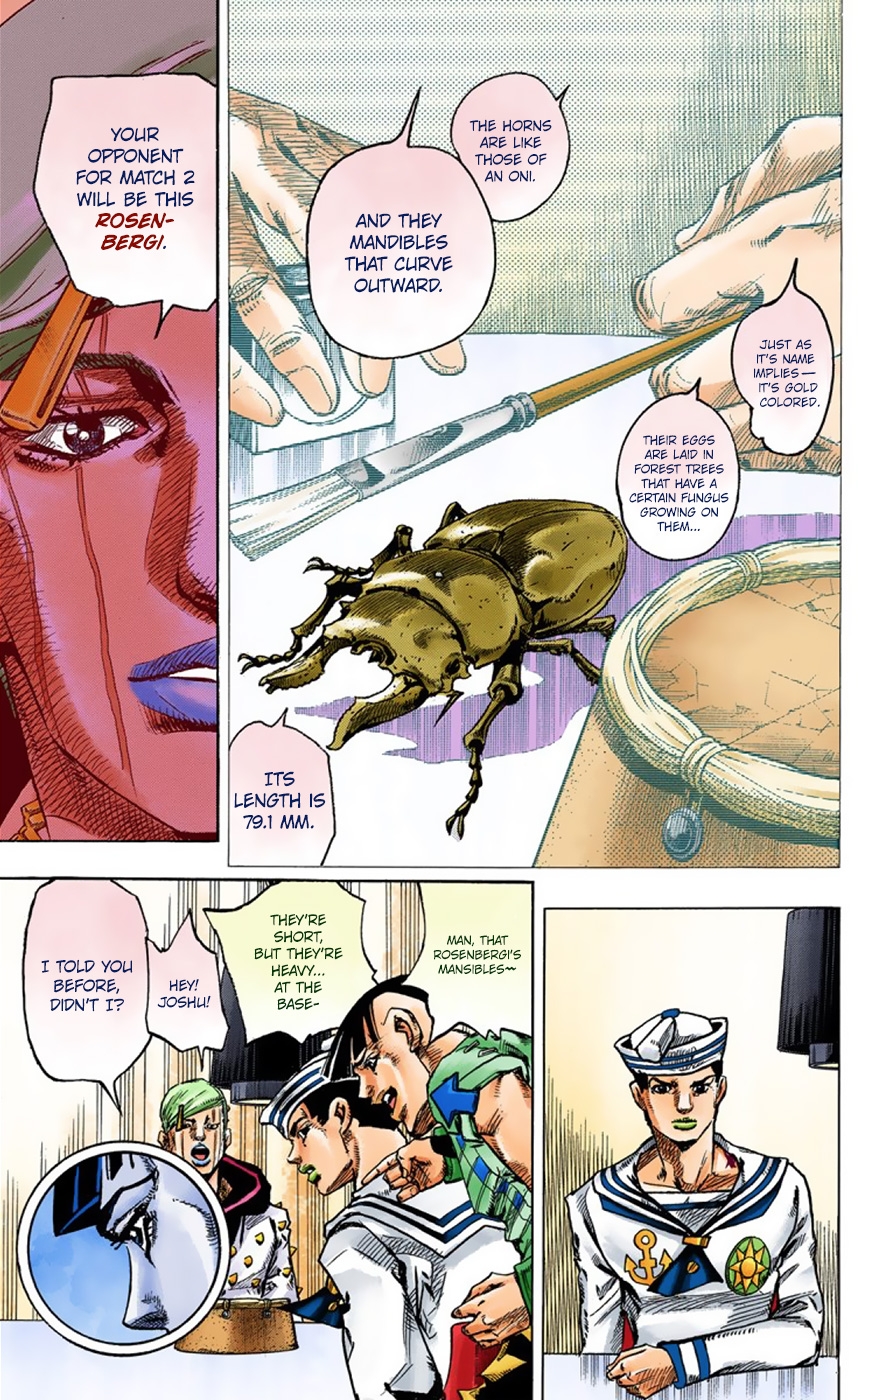 JoJo's Bizarre Adventure Part 8 JoJolion [Official Colored] Vol. 9 Ch. 36 Every Day is a Summer Vacation Part 3